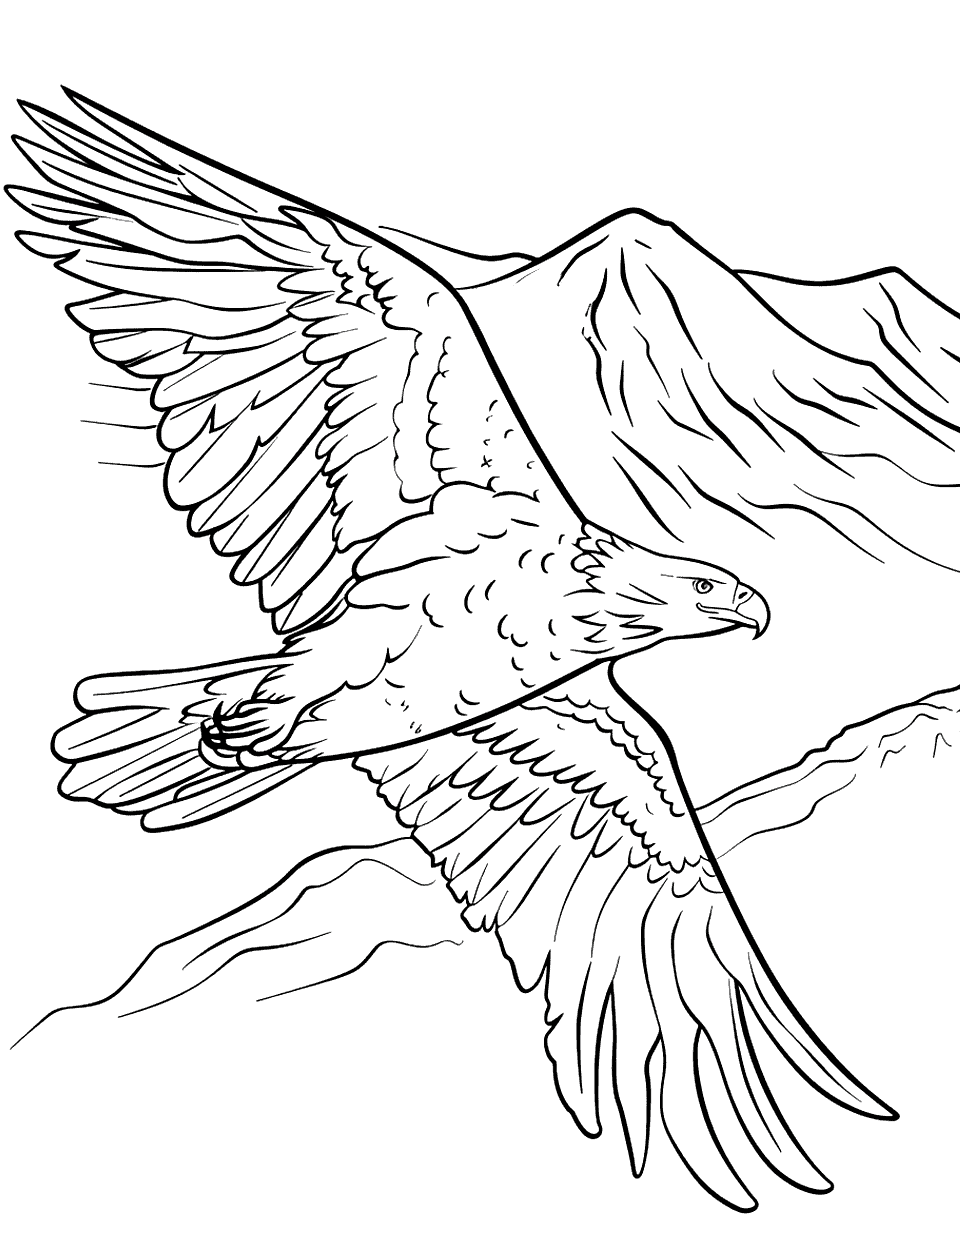 American Eagle in Flight Flag Coloring Page - An American eagle flying with a backdrop of mountains and a clear sky.